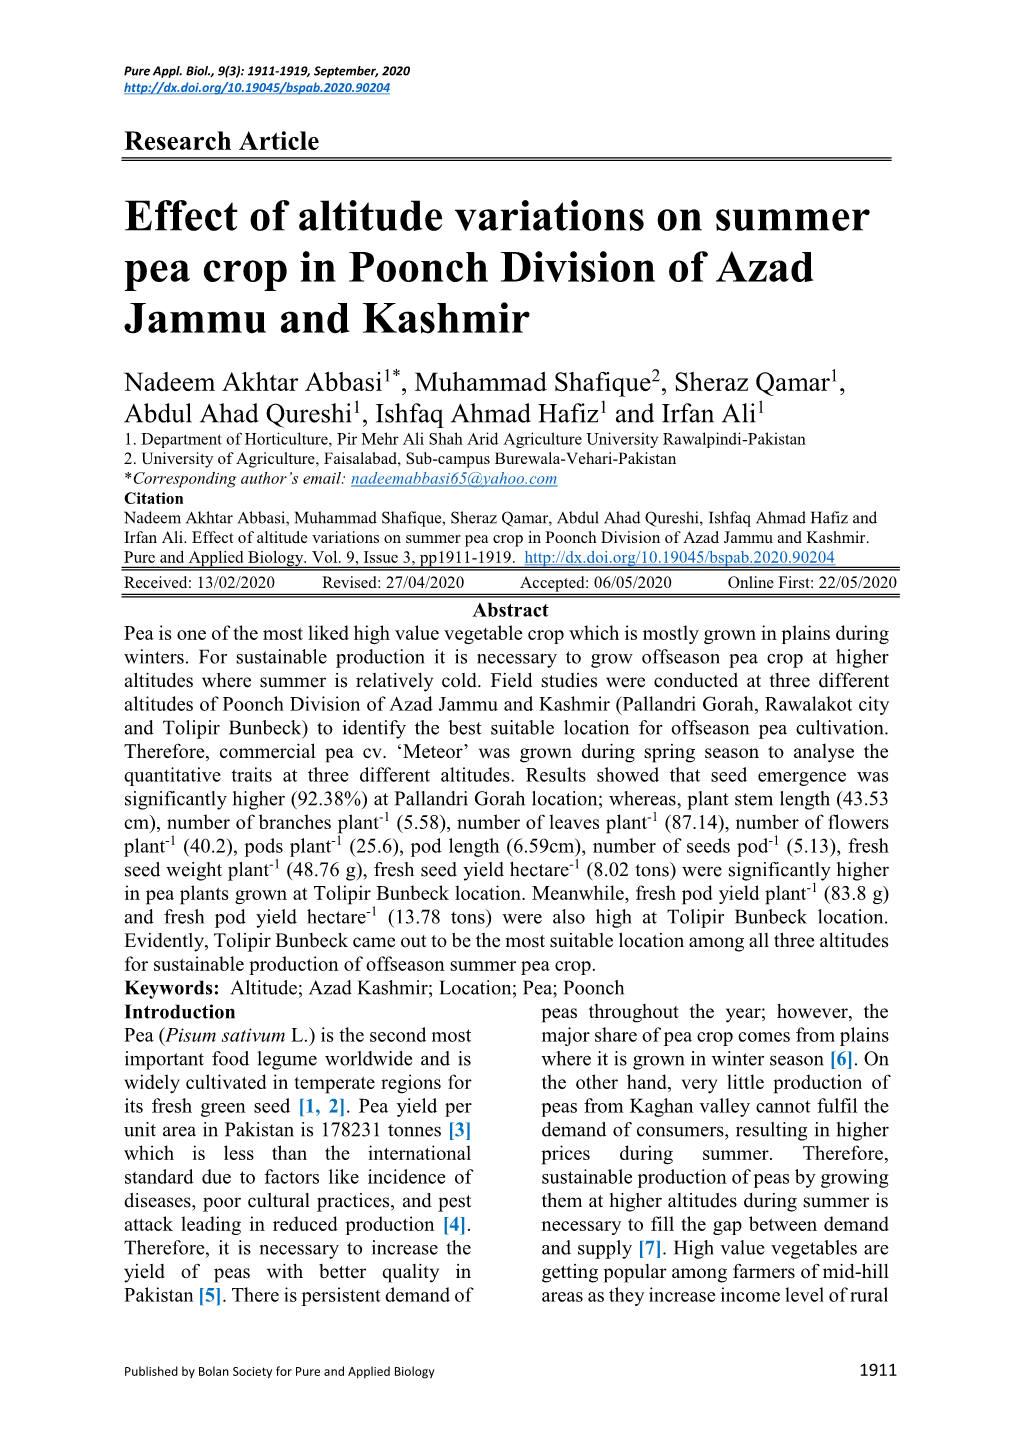 Effect of Altitude Variations on Summer Pea Crop in Poonch Division of Azad Jammu and Kashmir